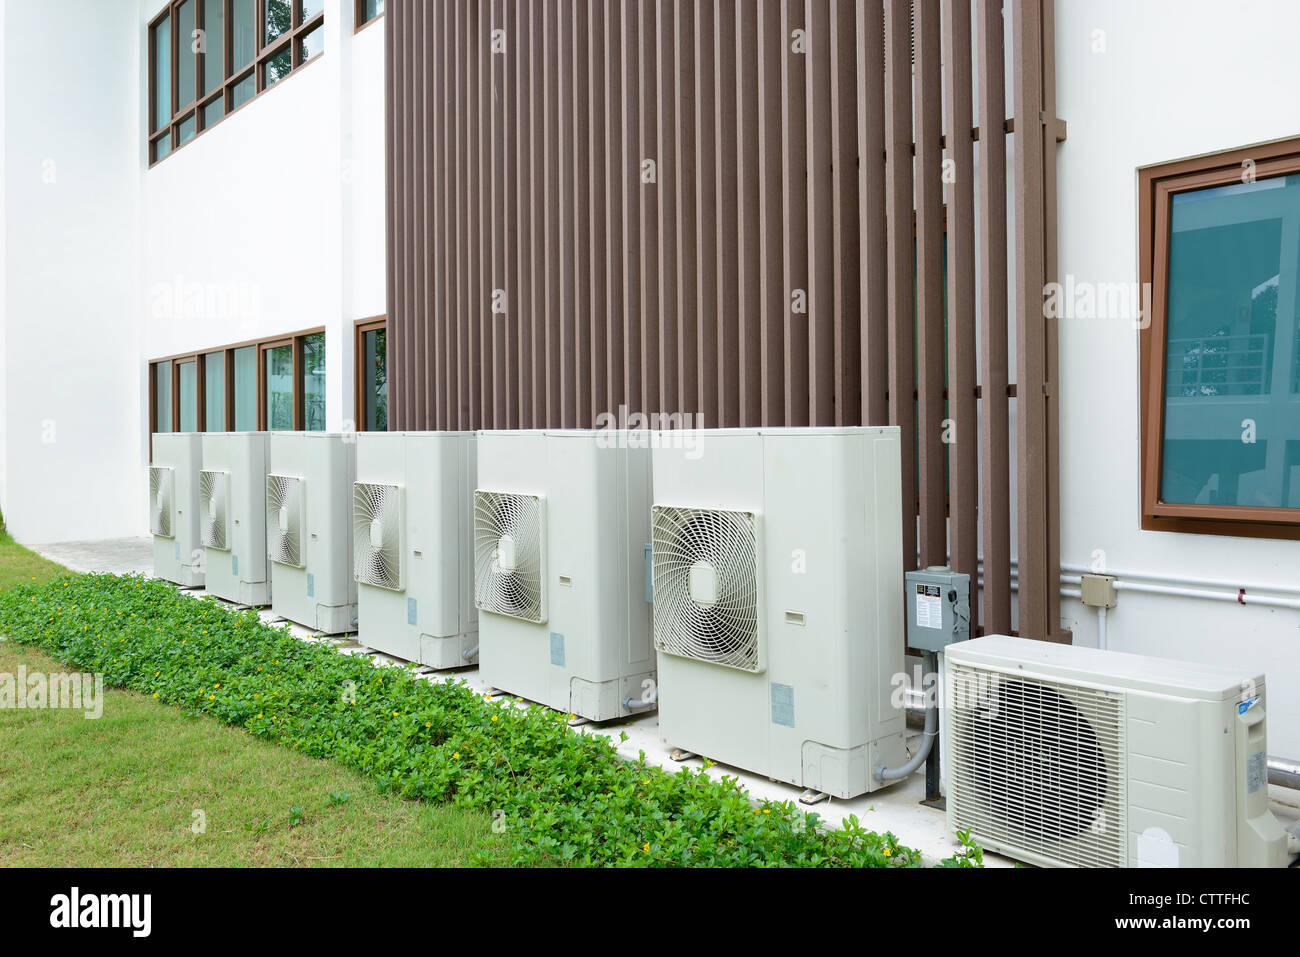 Compressor of air condition are set next to the building Stock Photo